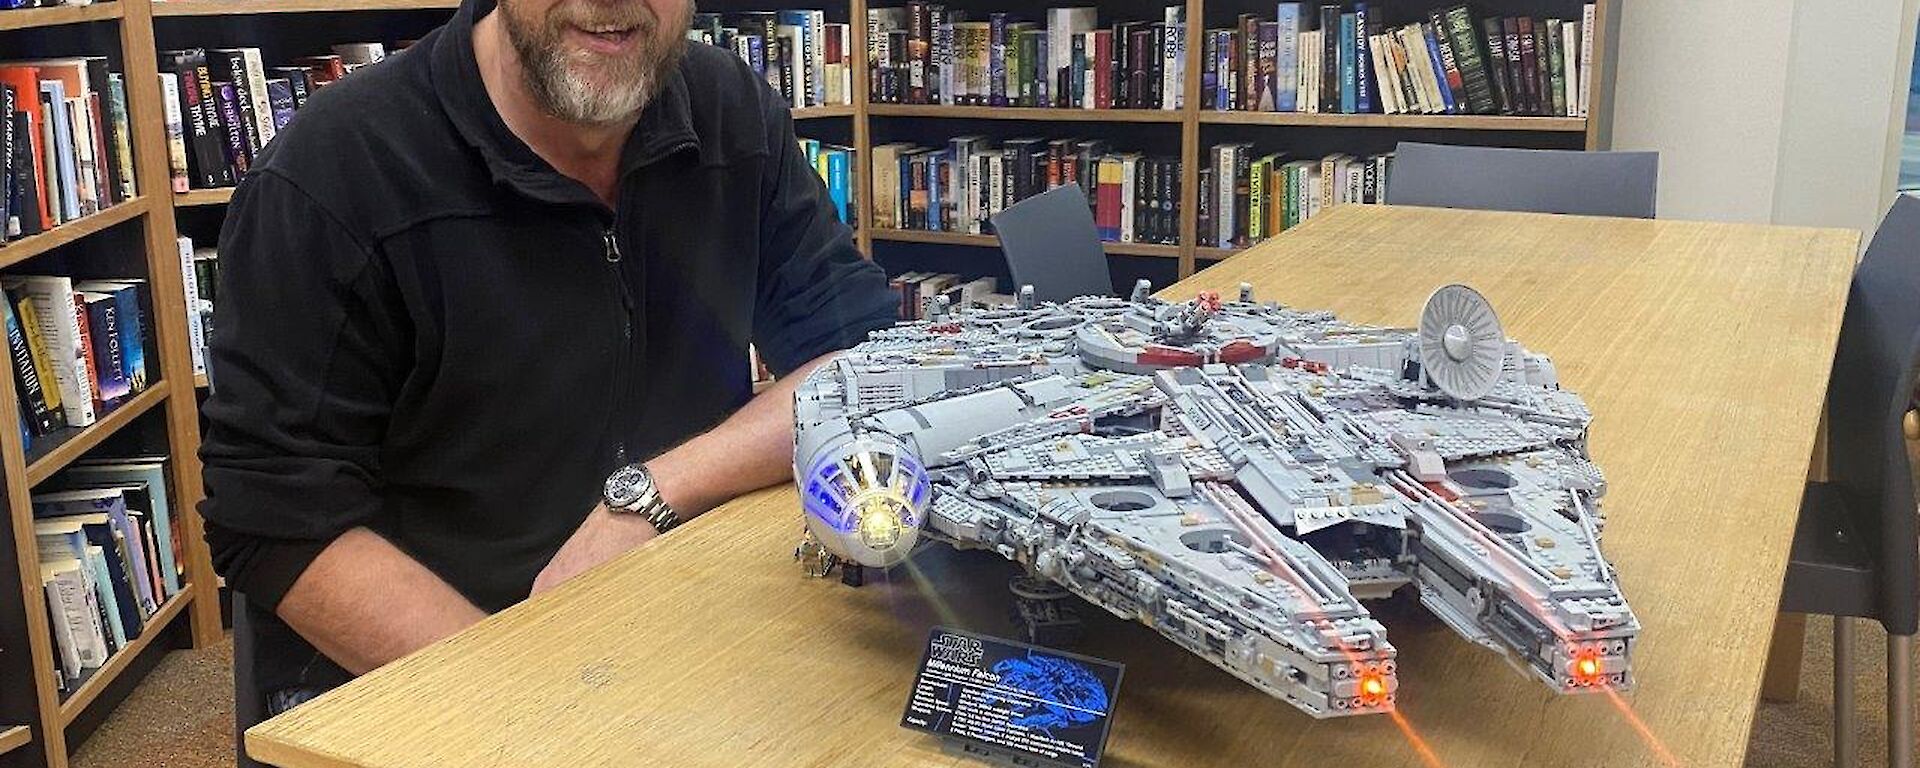 A man sits at a table, with bookshelves behind, smiling to camera.  A Lego Millennium Falcon model sits on the table, complete with lights and laser beams.